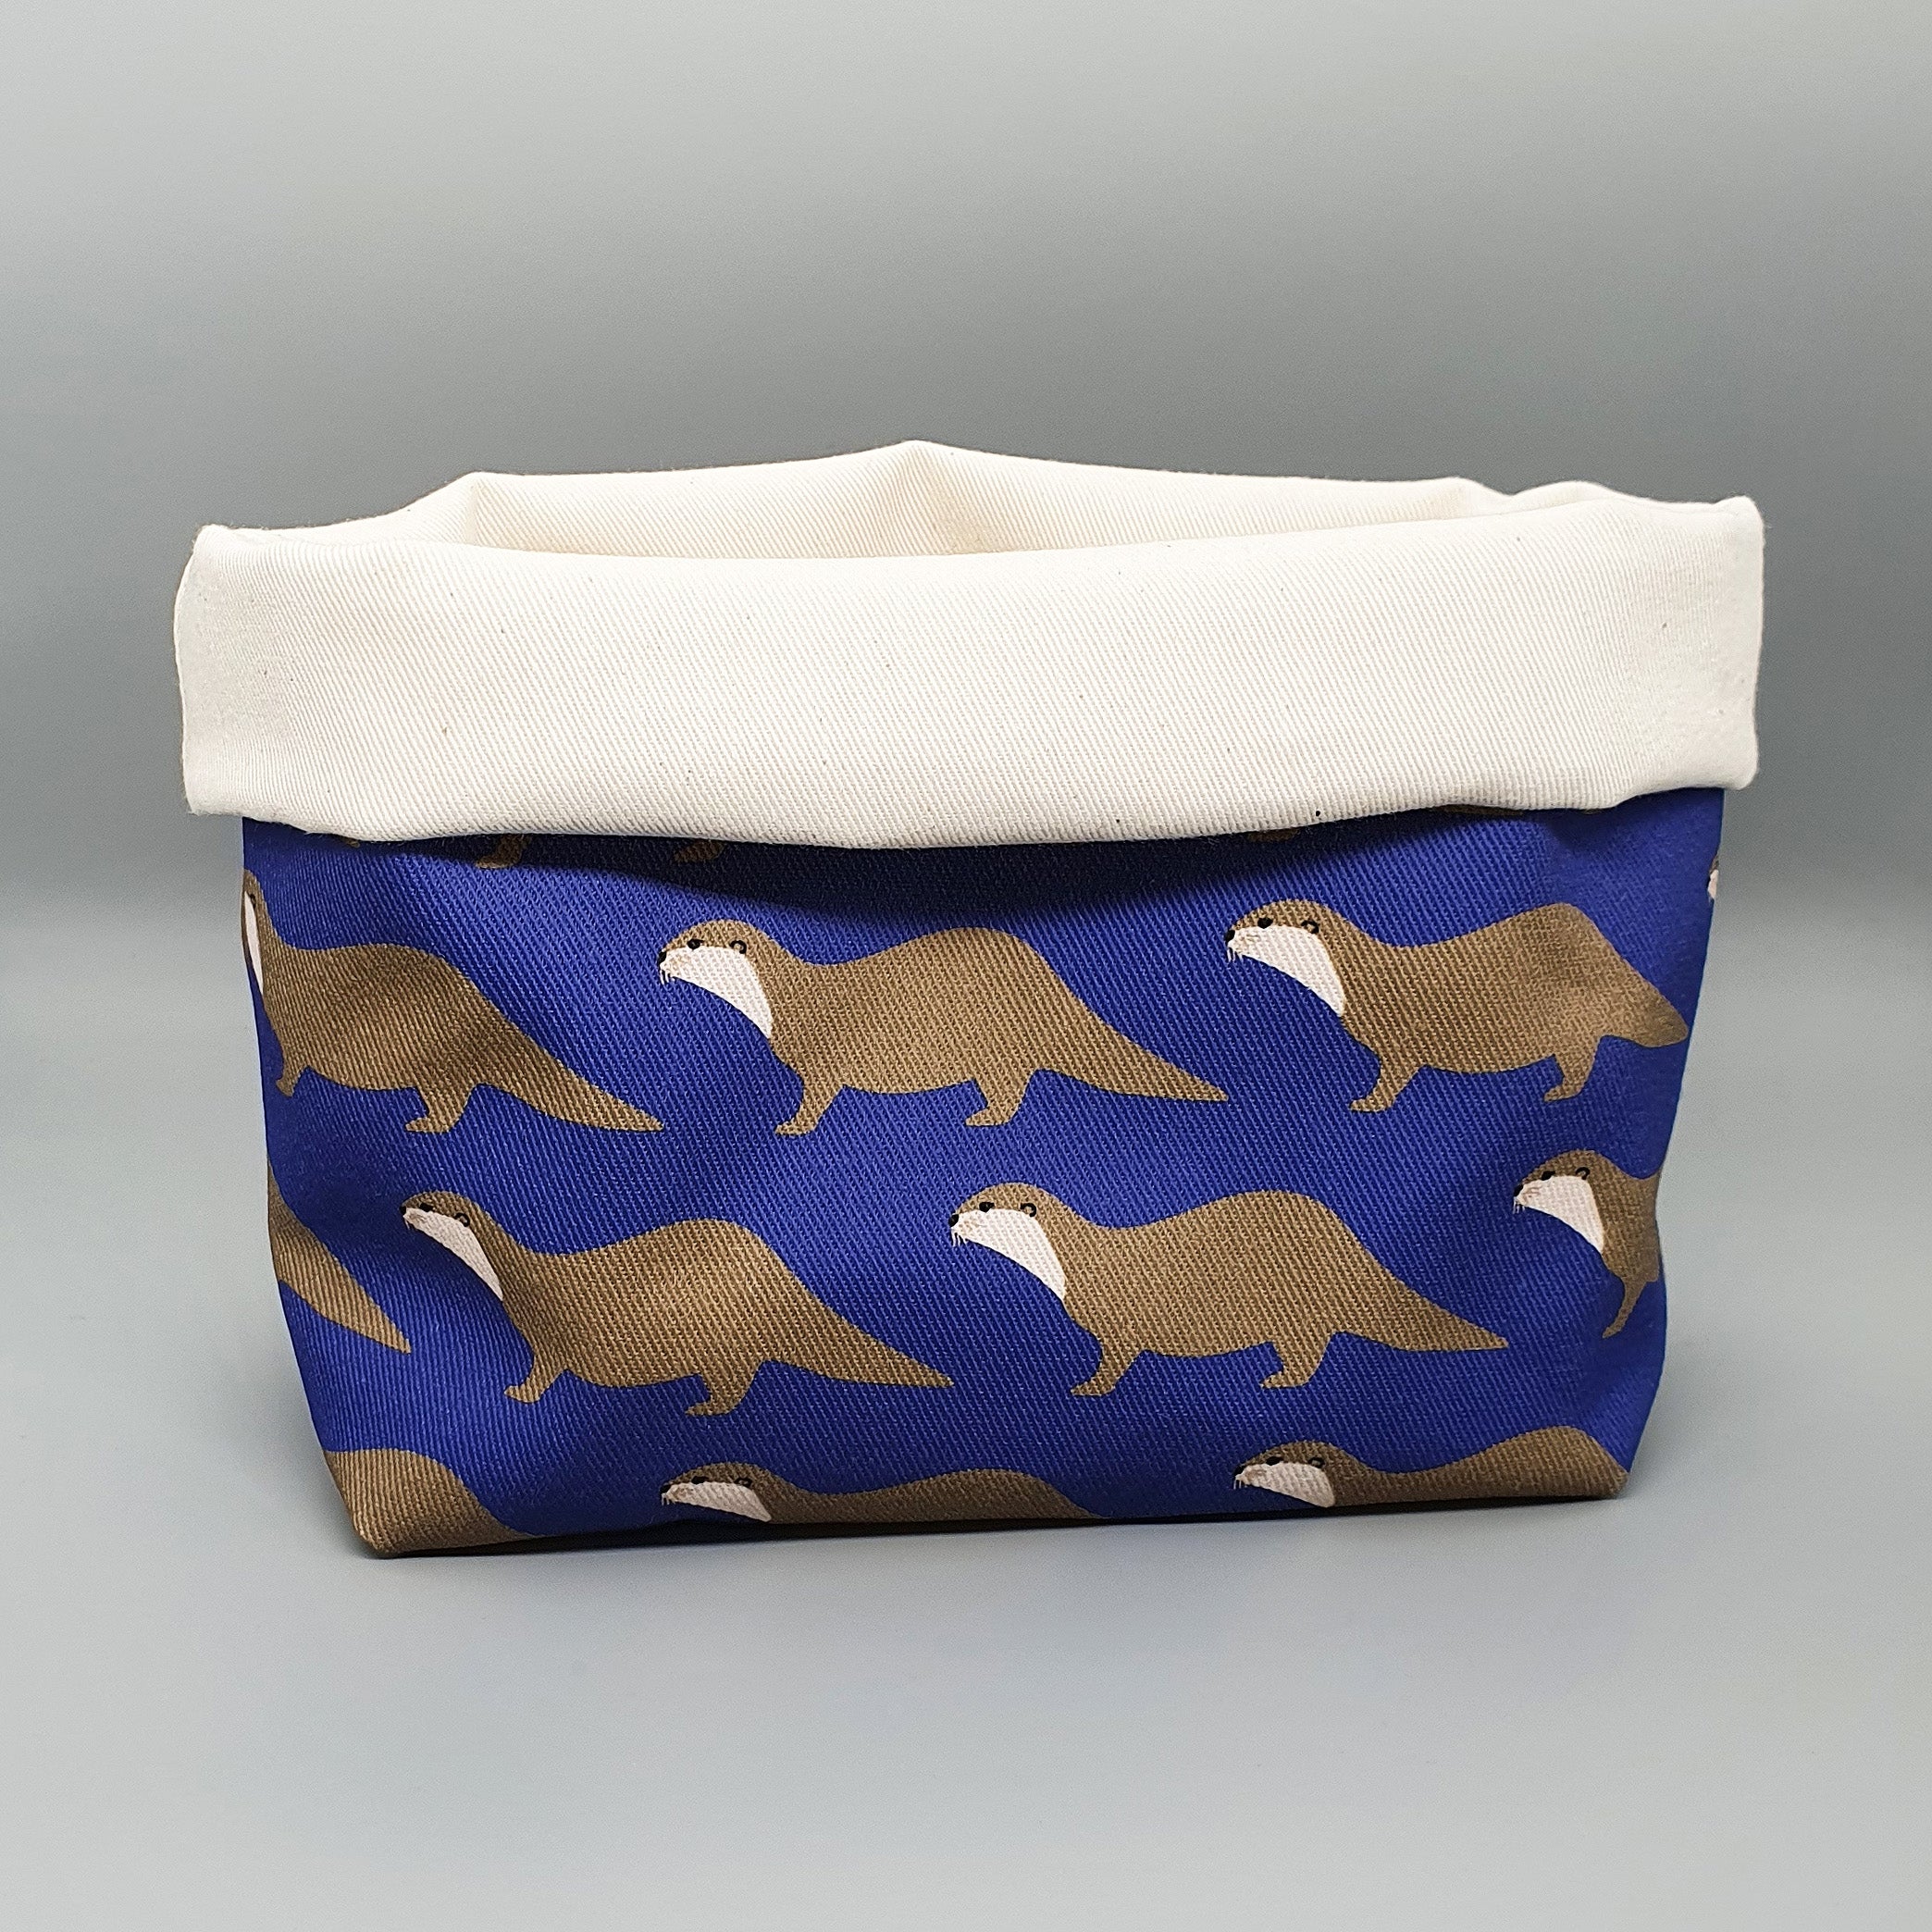 Otter fabric storage basket with natural lining